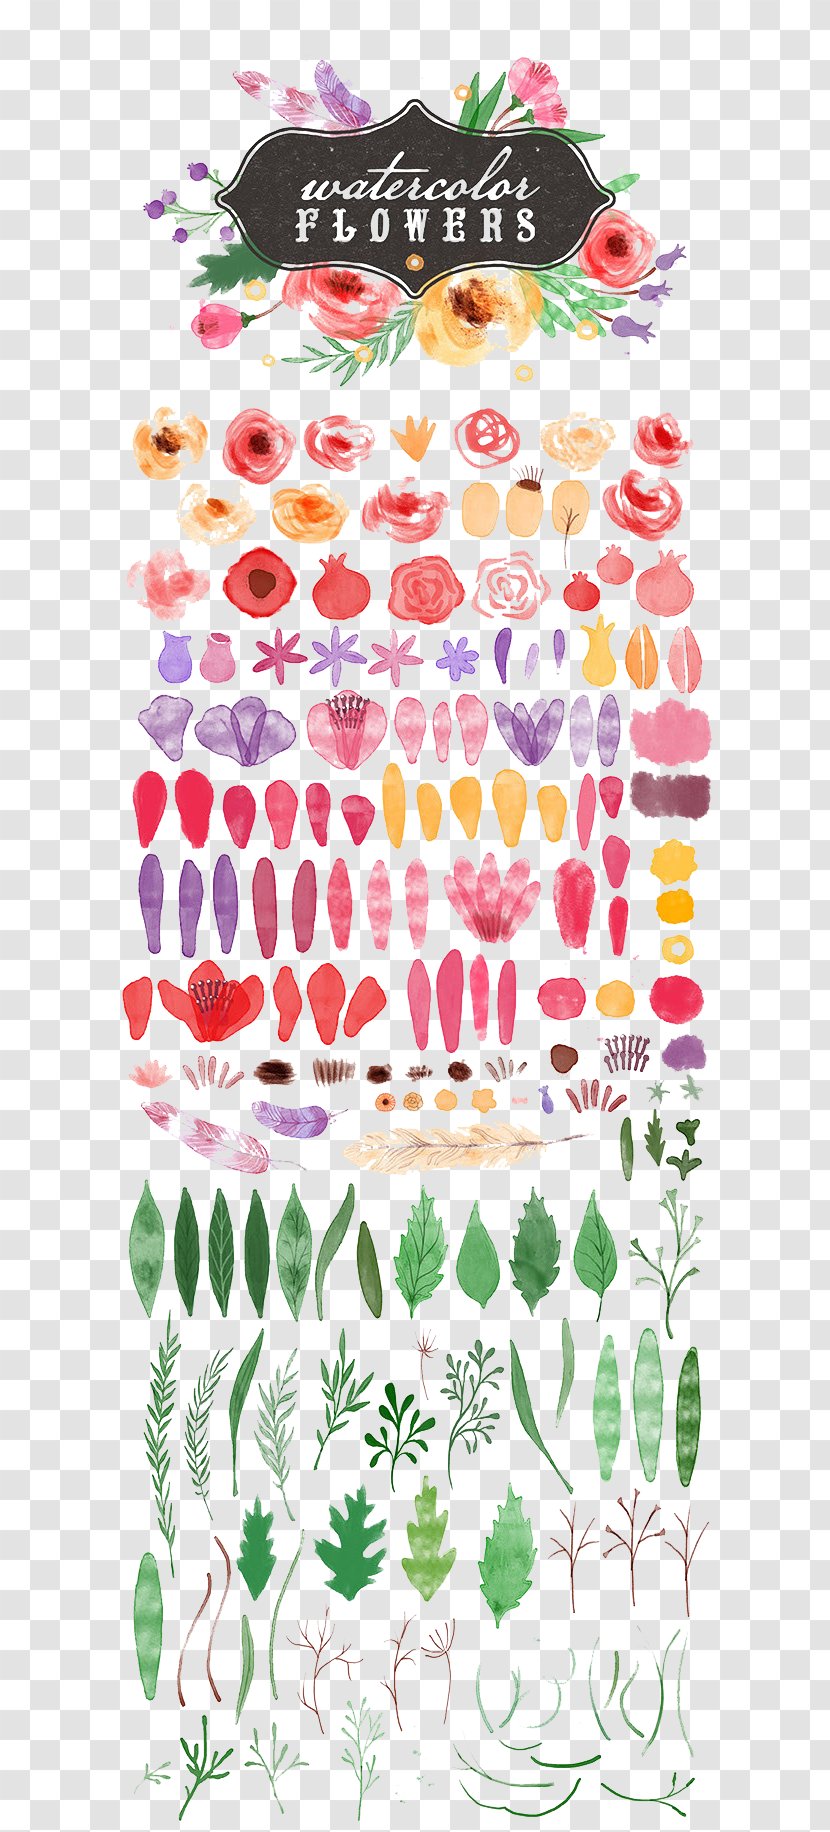 Watercolor Painting Illustration - Point - Floral Collection Transparent PNG